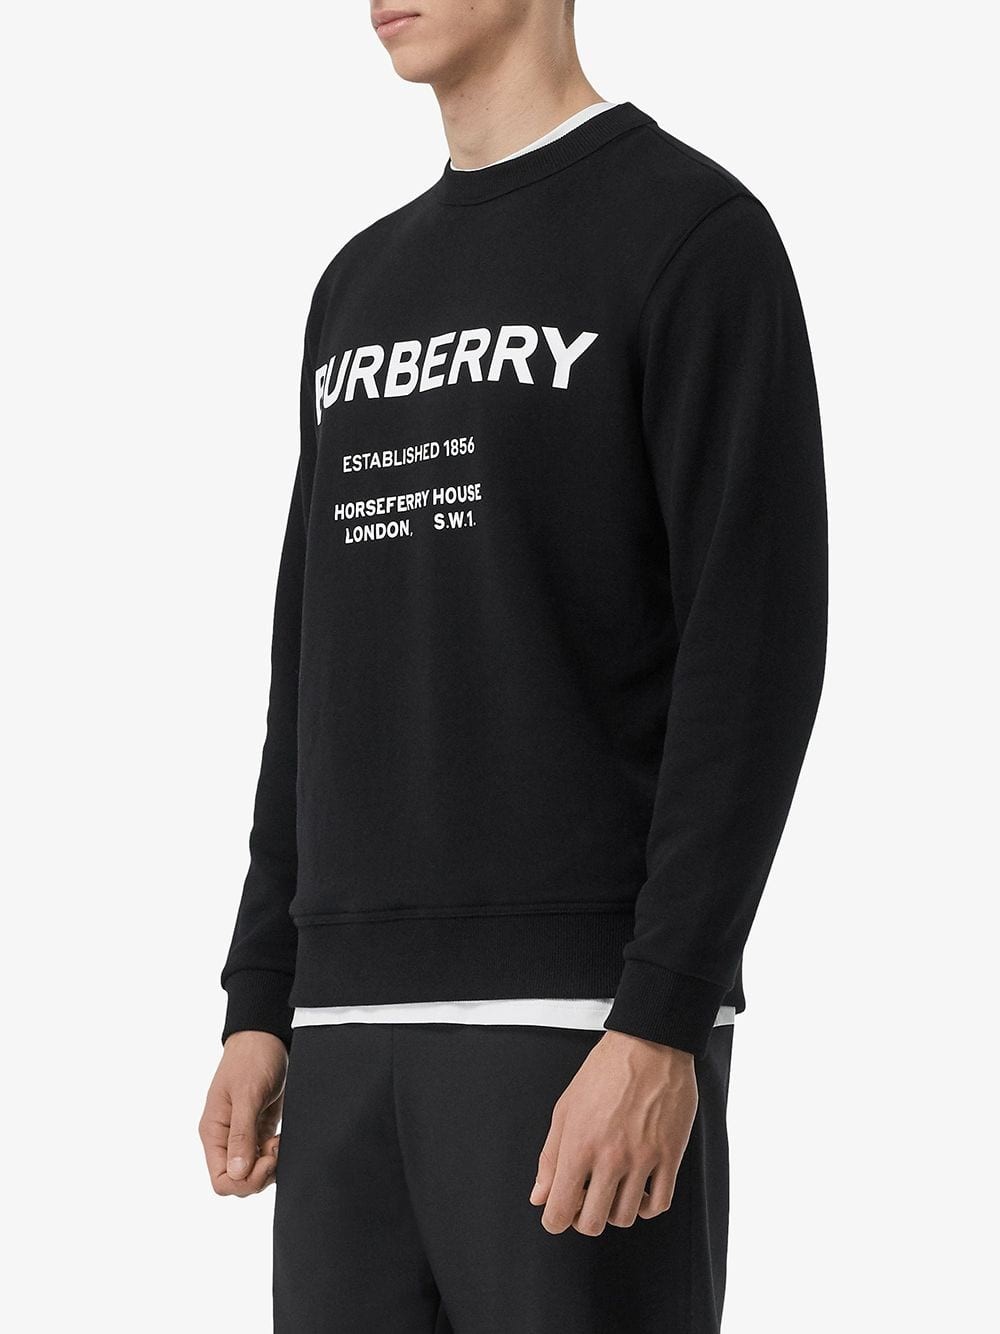 burberry LOGO SWEATER available on  - 29104